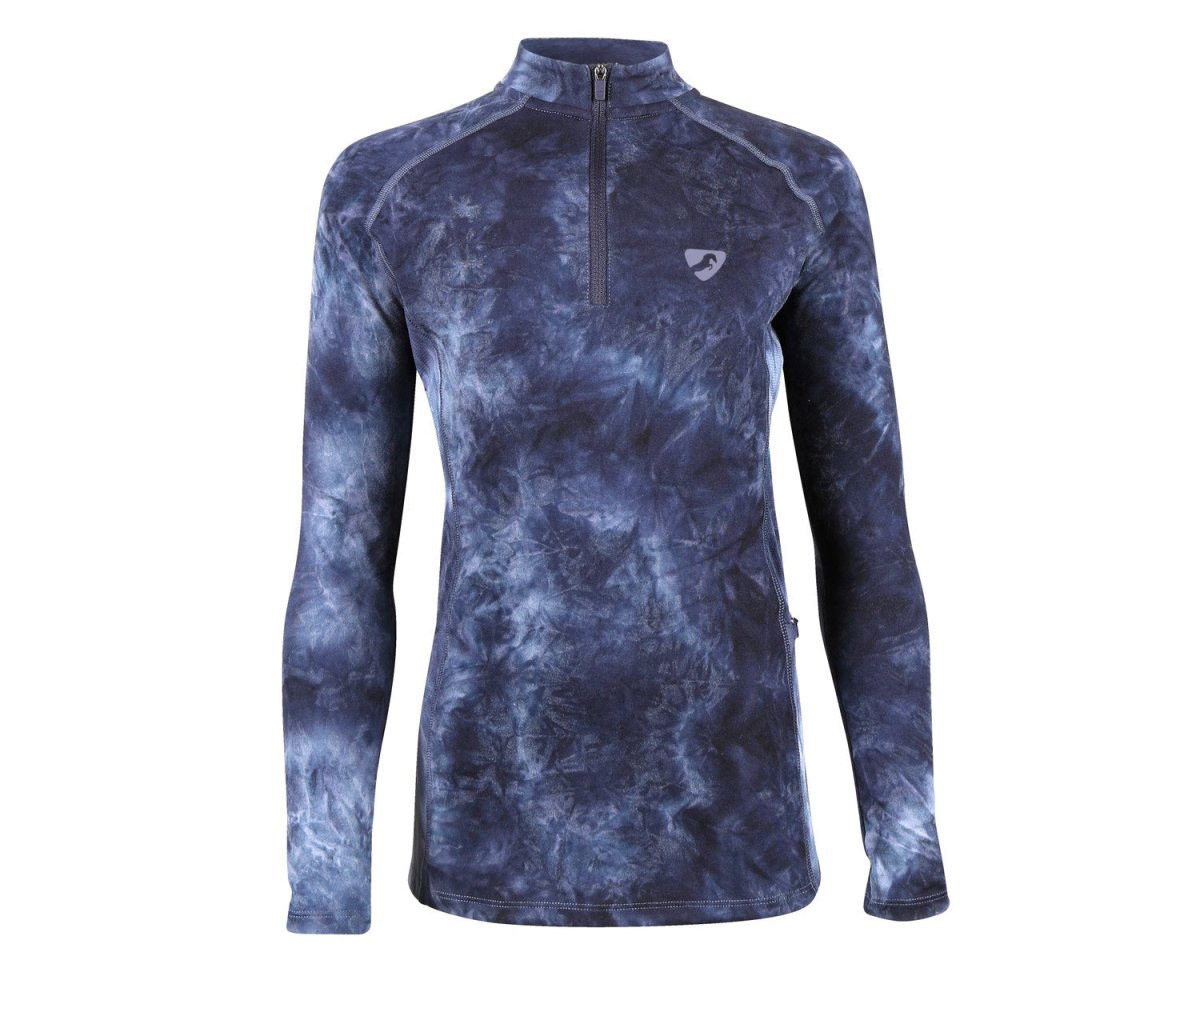 Aubrion SS24 Revive Long Sleeve Base Layer - Young Rider - Navy TyeDye - 11/12 Years